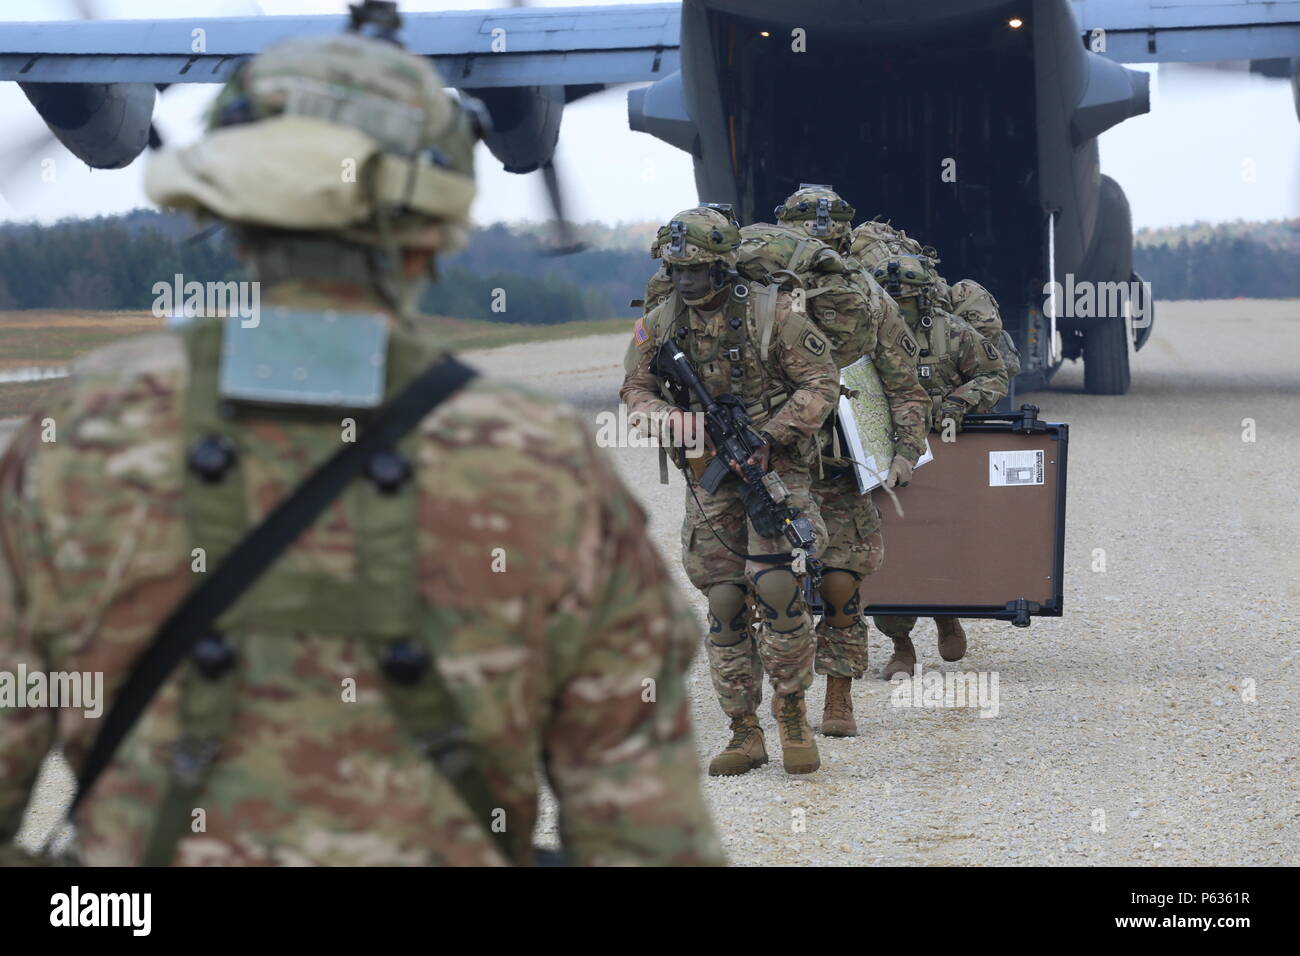 U.S. Soldiers of 54th Brigade Engineer Battalion, 173rd Airborne Brigade maneuver from a Lockheed C-130 Hercules while conducting a cargo unloading operation during exercise Saber Junction 16 at the U.S. Army’s Joint Multinational Readiness Center (JMRC) in Hohenfels, Germany, April 14, 2016. Saber Junction 16 is the U.S. Army Europe’s 173rd Airborne Brigade’s combat training center certification exercise, taking place at the JMRC in Hohenfels, Germany, Mar. 31-Apr. 24, 2016.  The exercise is designed to evaluate the readiness of the Army’s Europe-based combat brigades to conduct unified land  Stock Photo